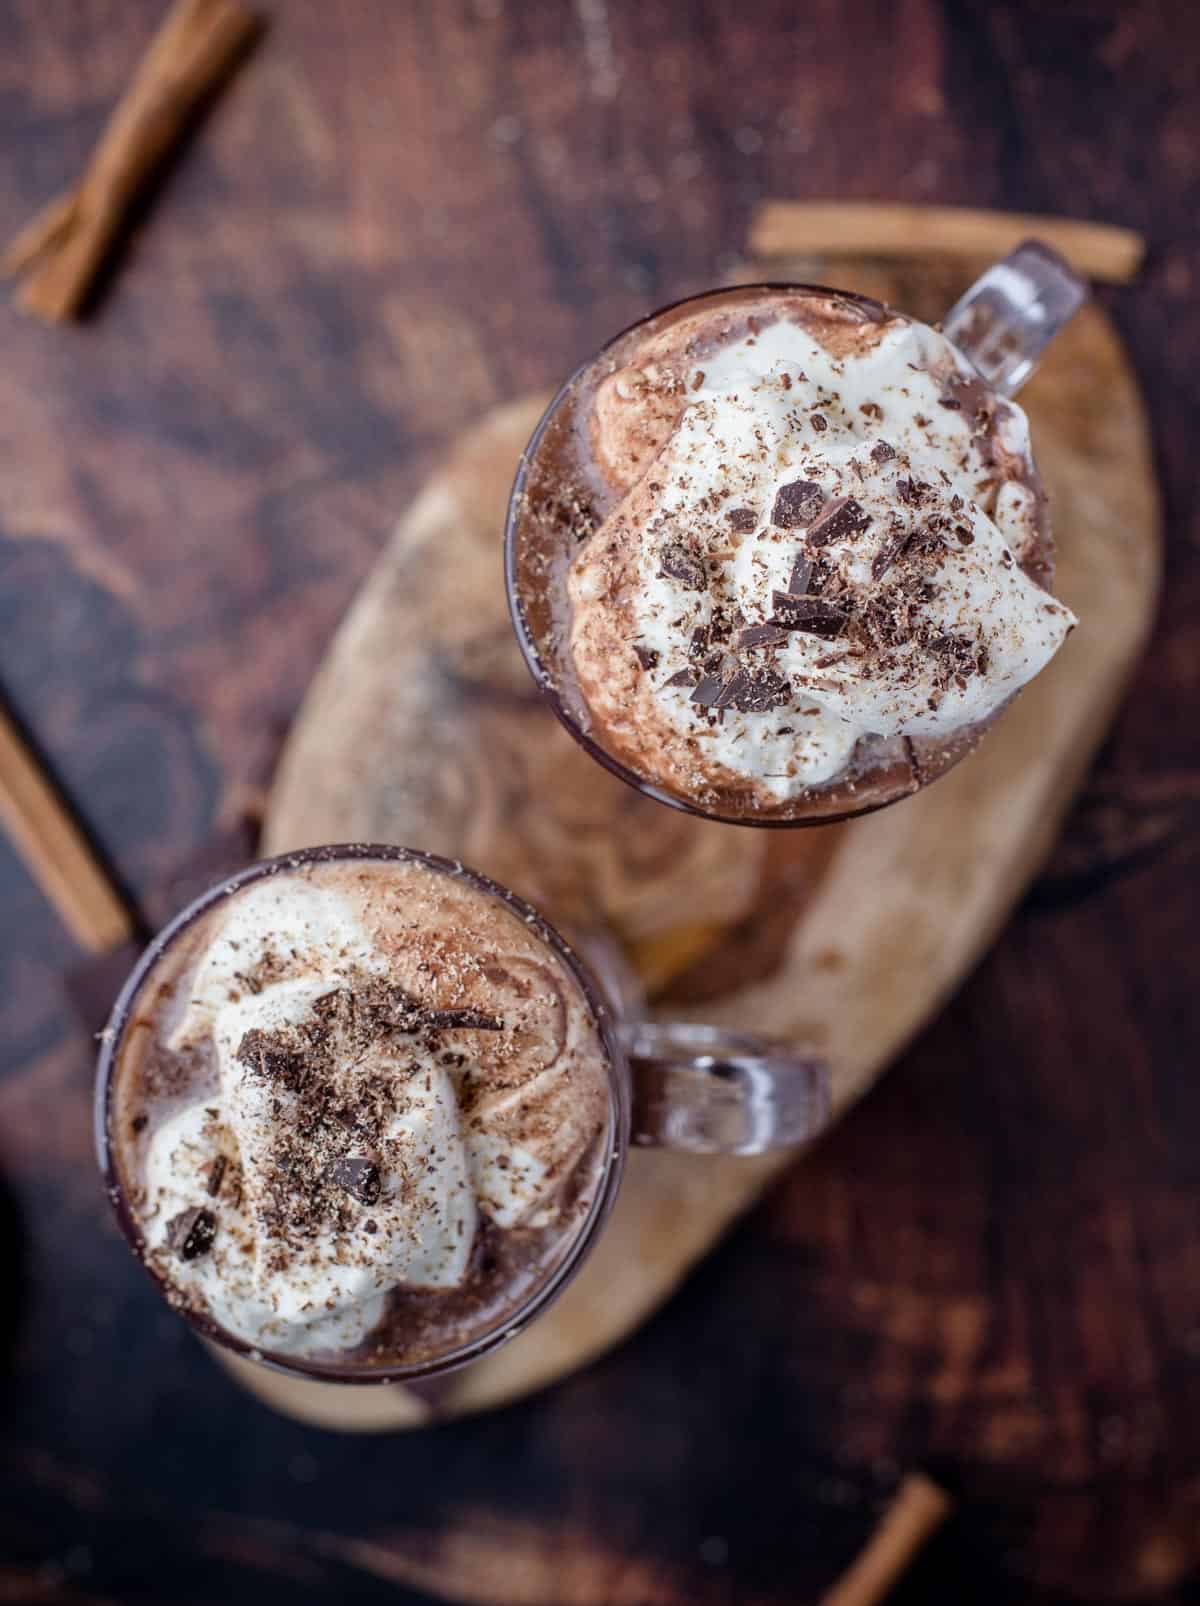 A top down view of two glasses of smoked hot chocolate